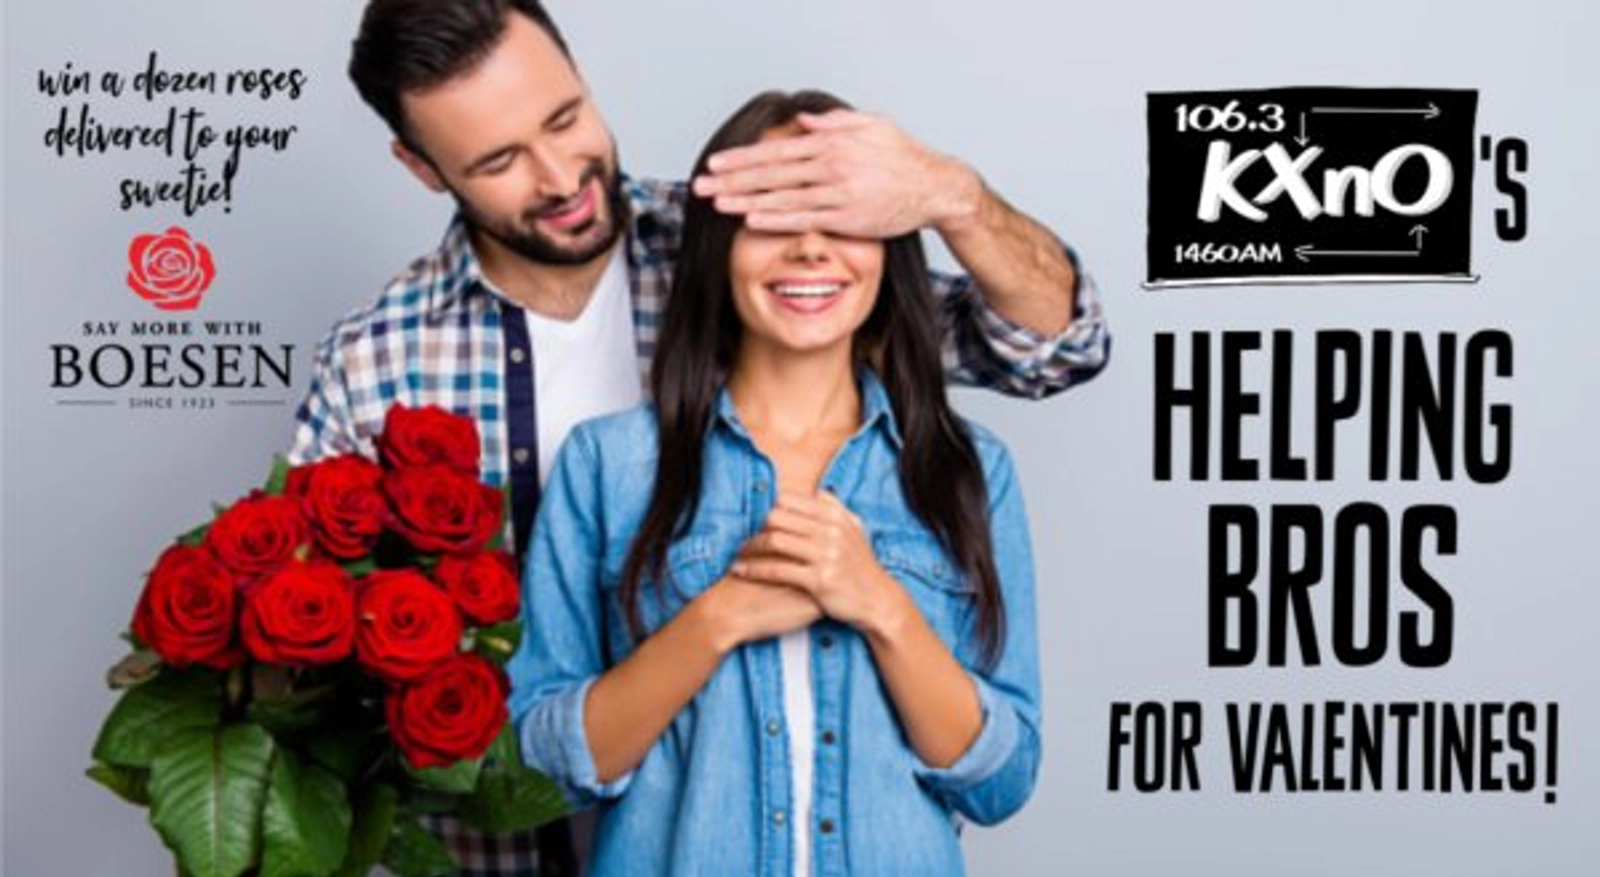 KXnO's Helping Bros with Roses From Boesen's for Valentines! - Thumbnail Image